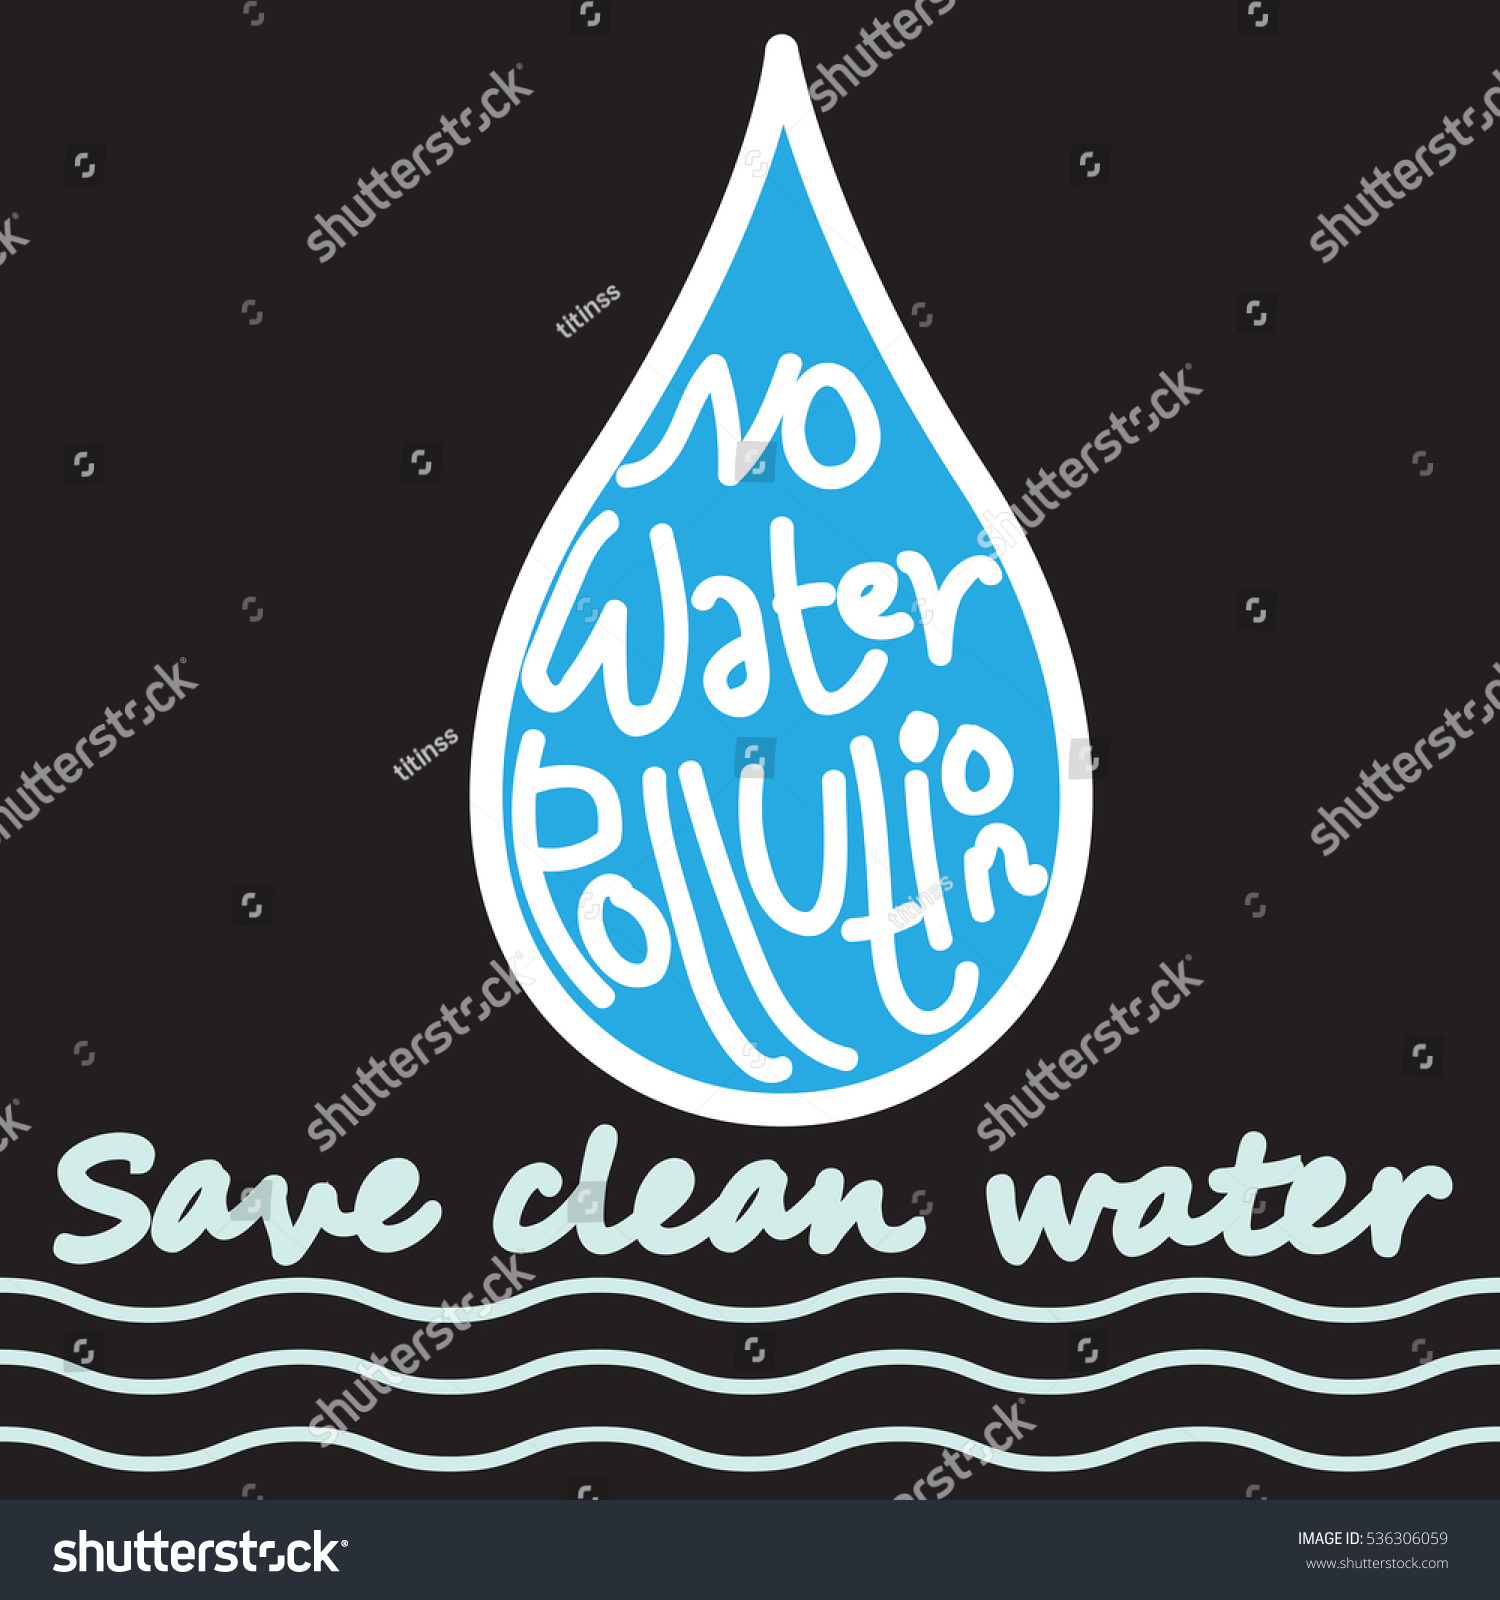 Water Pollution Poster Stock Vector (Royalty Free) 536306059 | Shutterstock